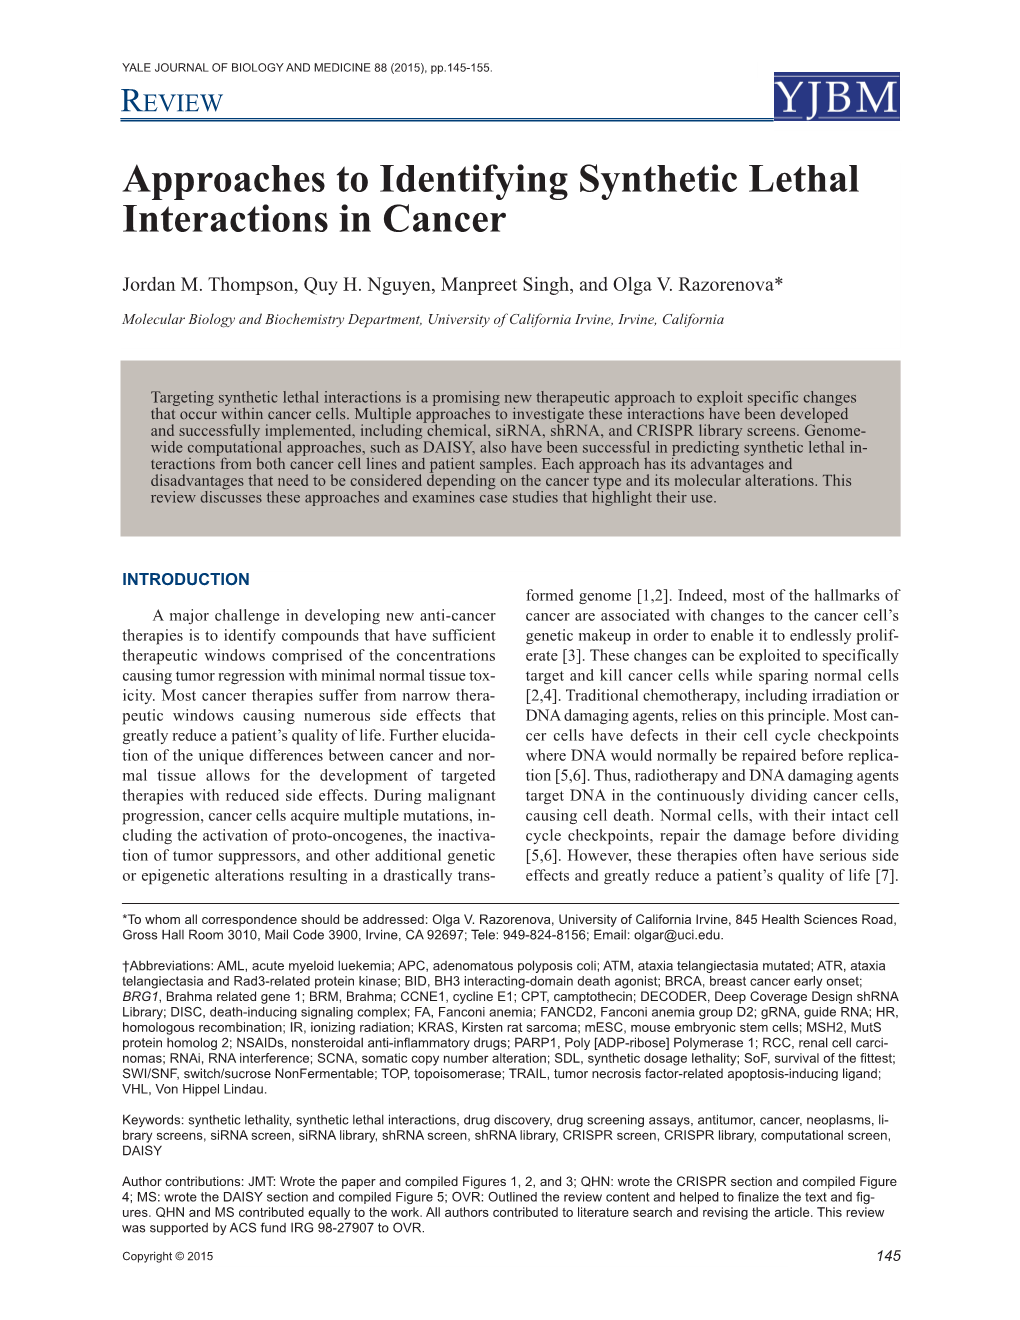 Approaches to Identifying Synthetic Lethal Interactions in Cancer